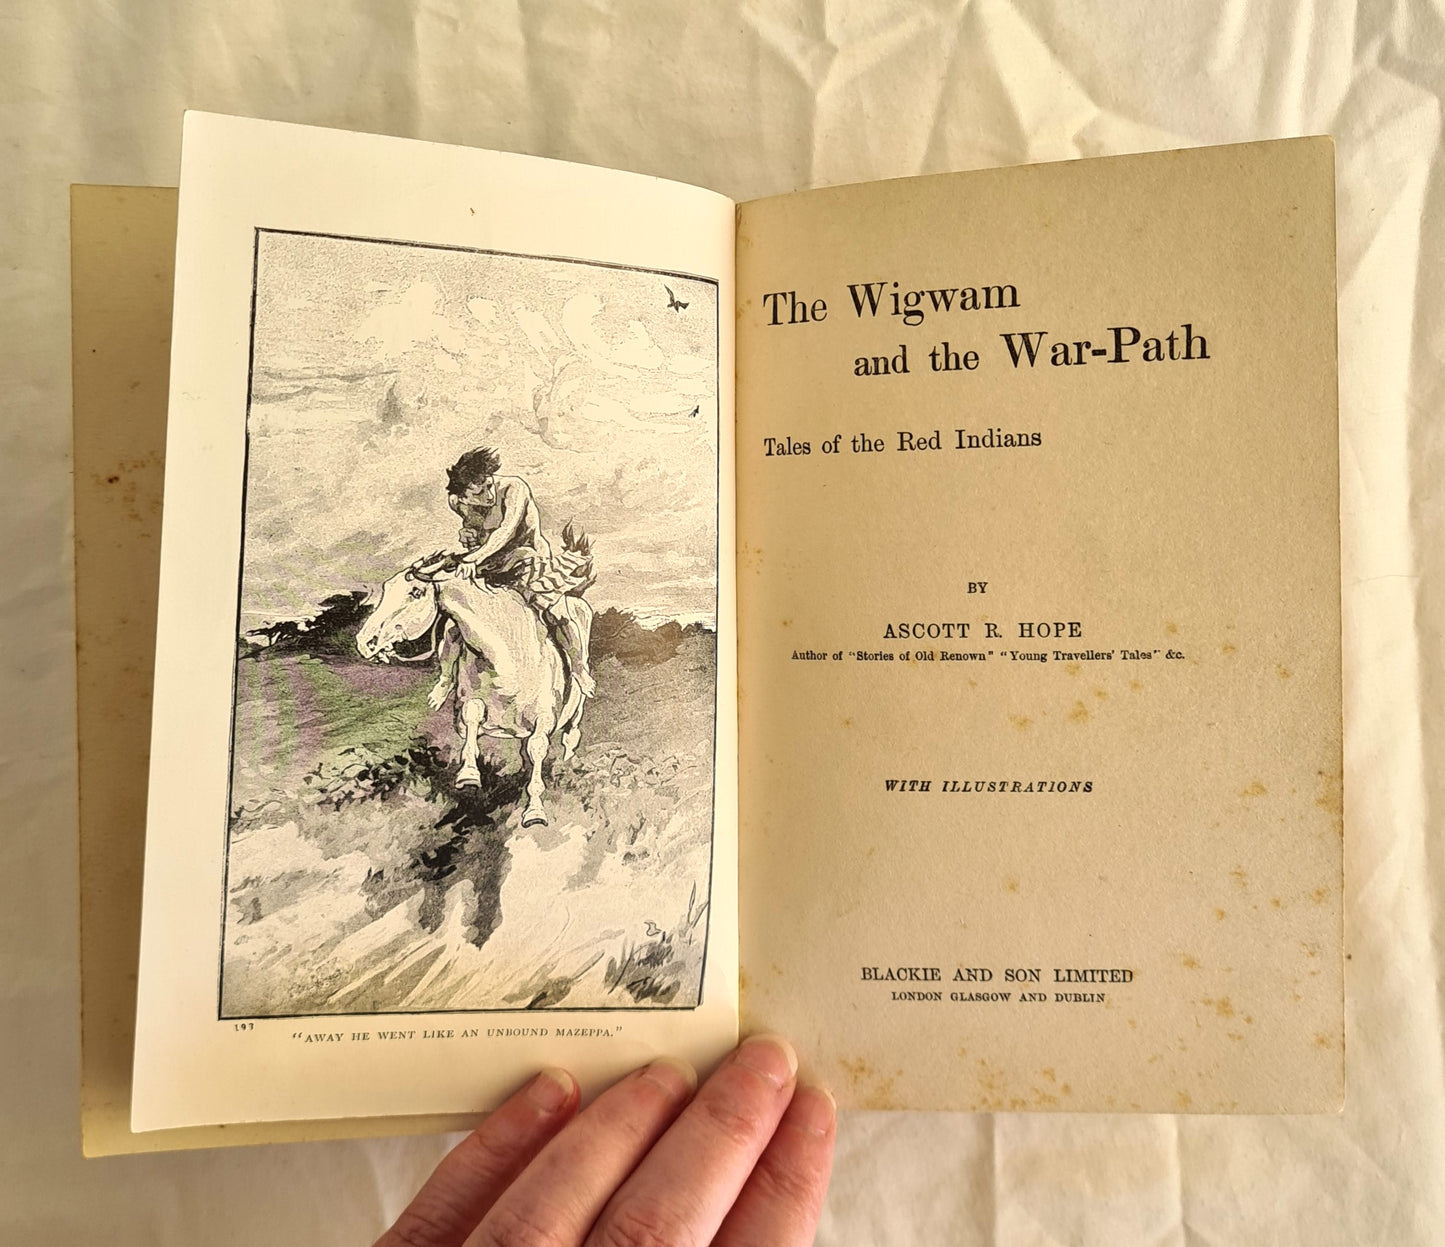 The Wigwam and the War-Path by Ascott R. Hope